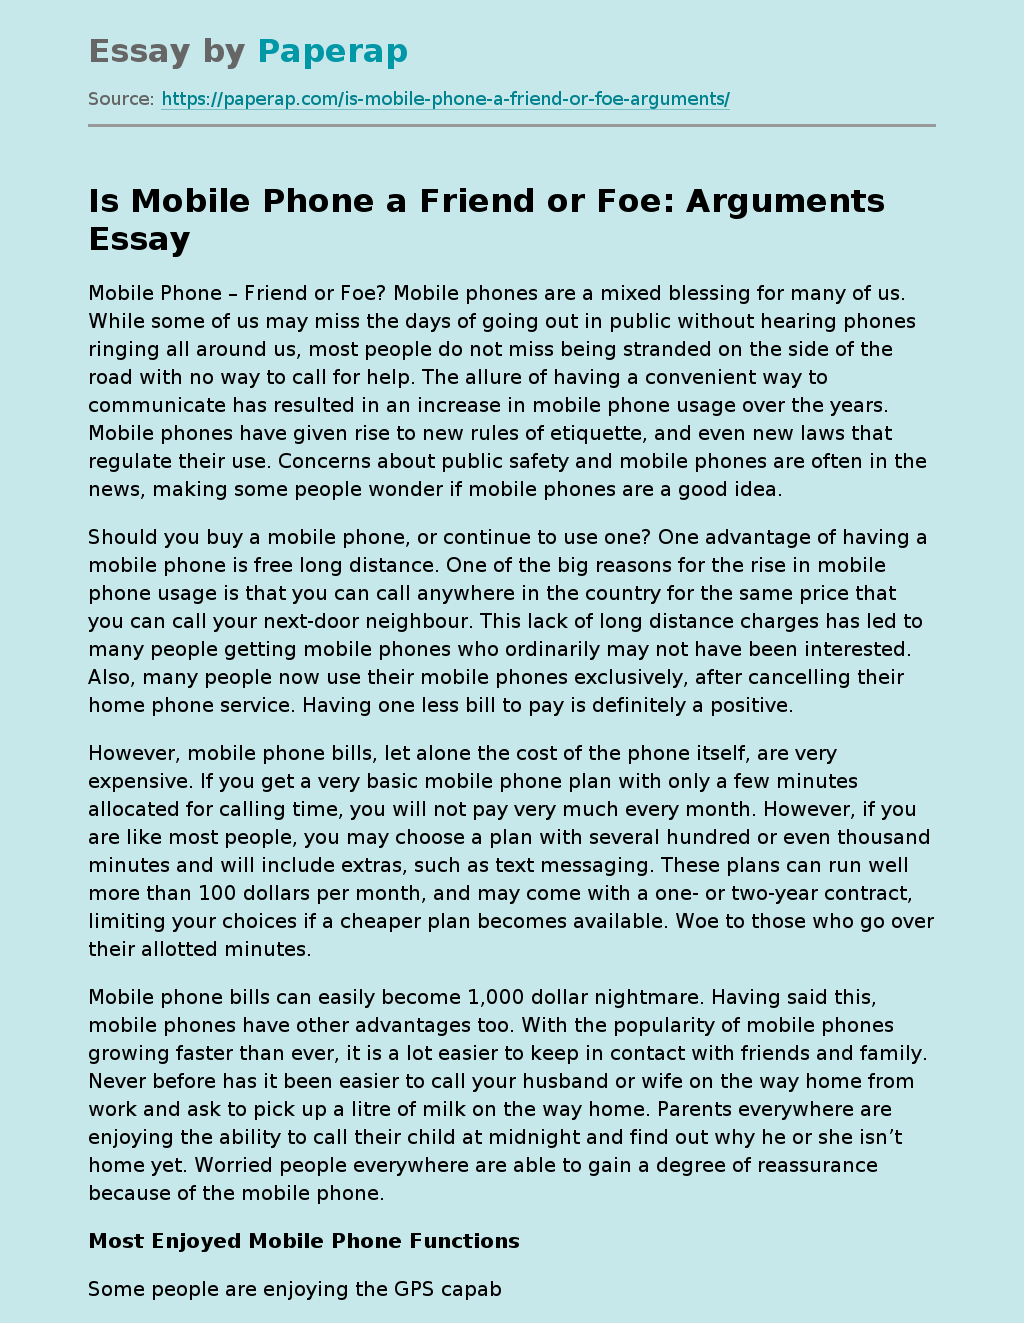 Is Mobile Phone a Friend or Foe: Arguments